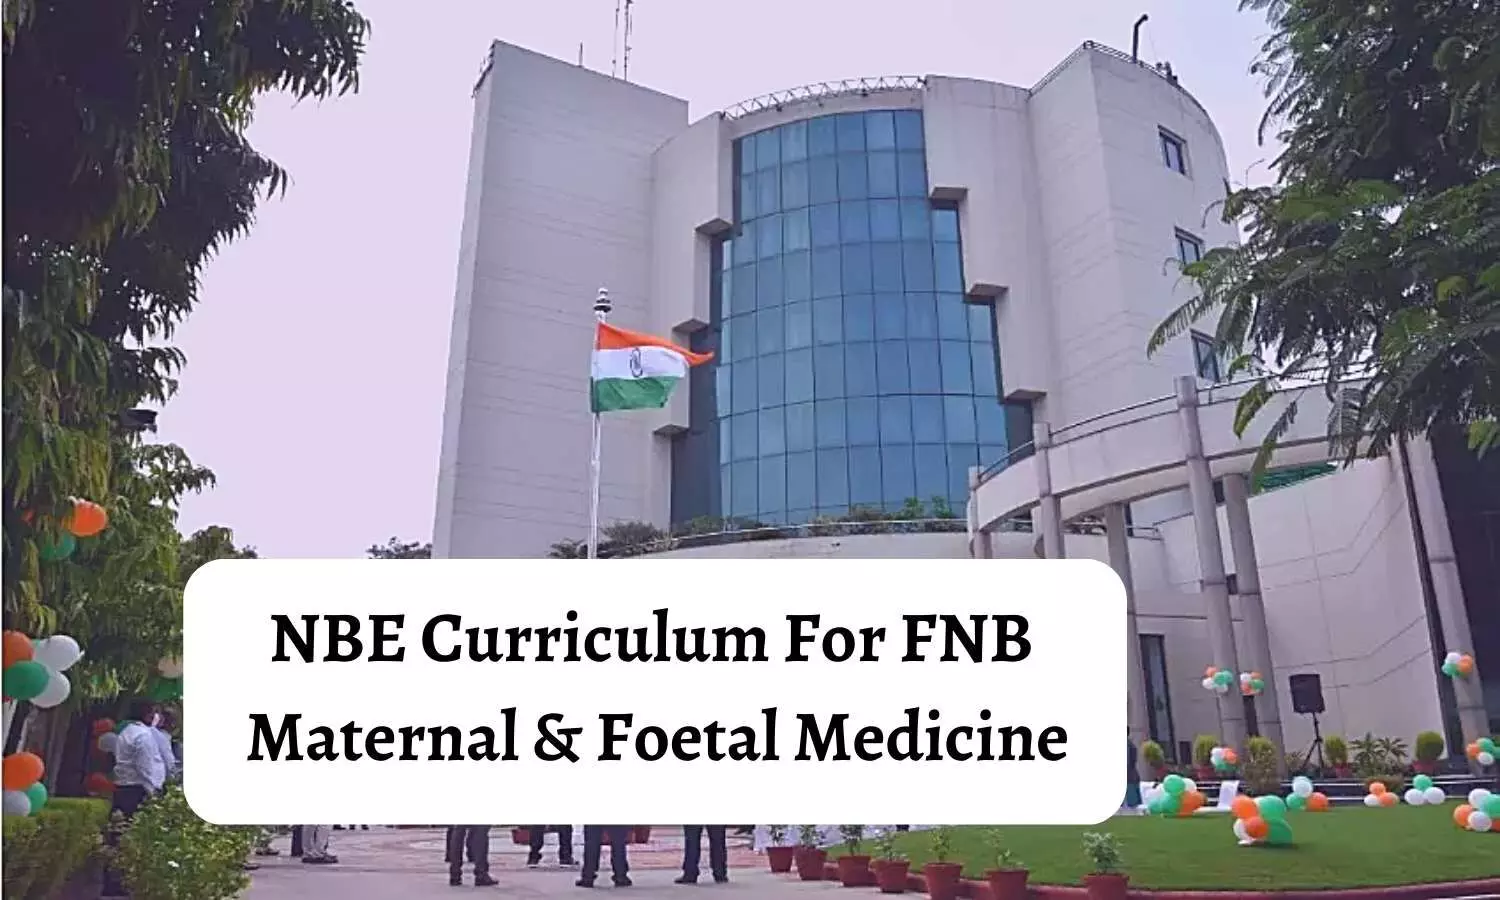 FNB Maternal and Foetal Medicine: Check out NBE released Curriculum